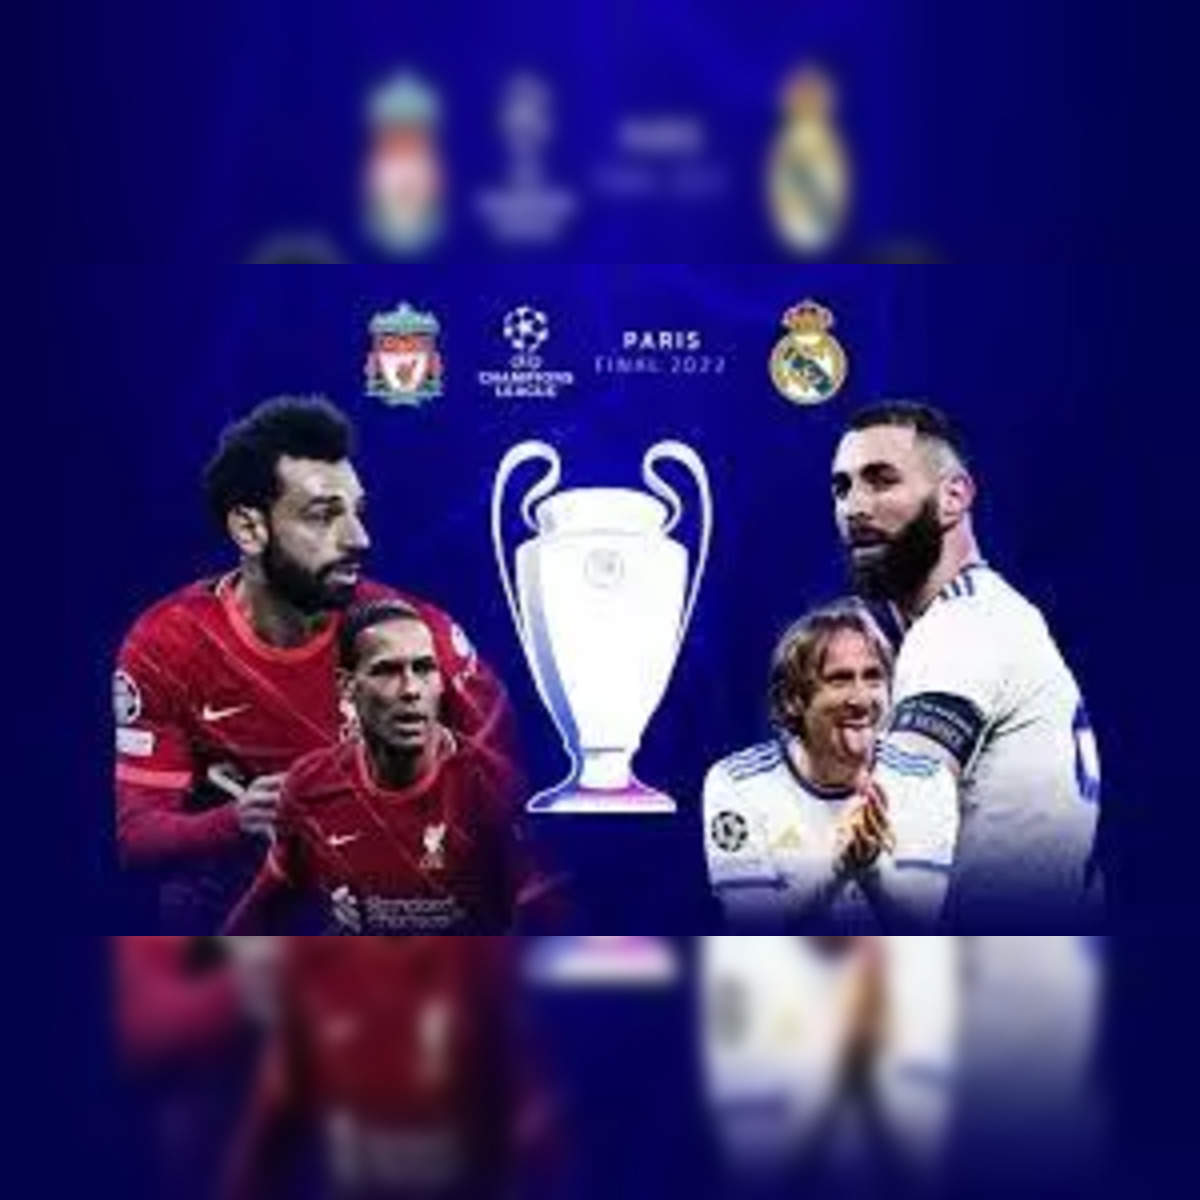 Liverpool vs Real Madrid Check kick-off time, date, TV channel, live stream and all you need to know